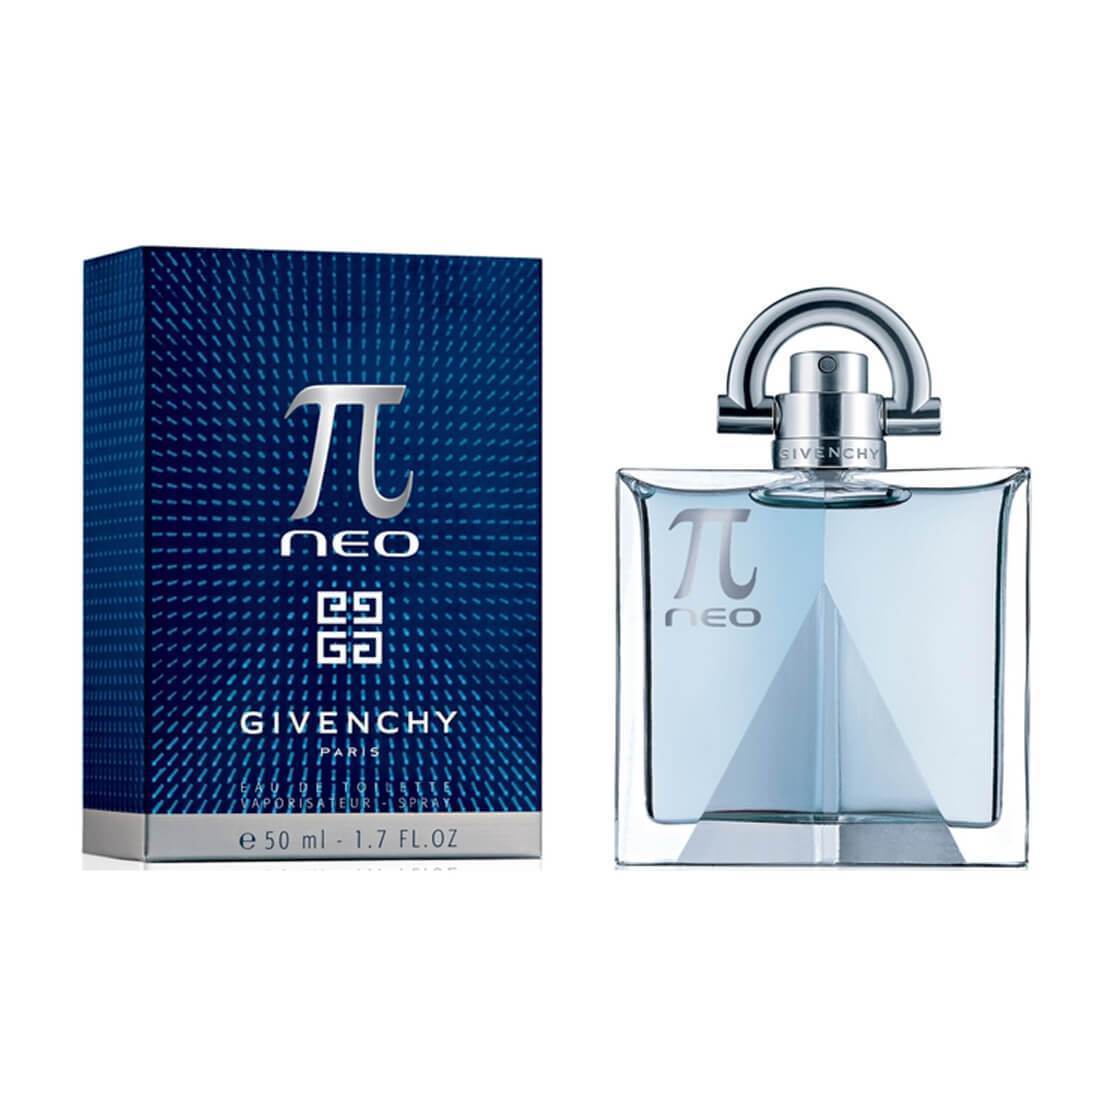 Givenchy Pi Neo EDT Perfume For Men – 100ml - Swiss Yarn